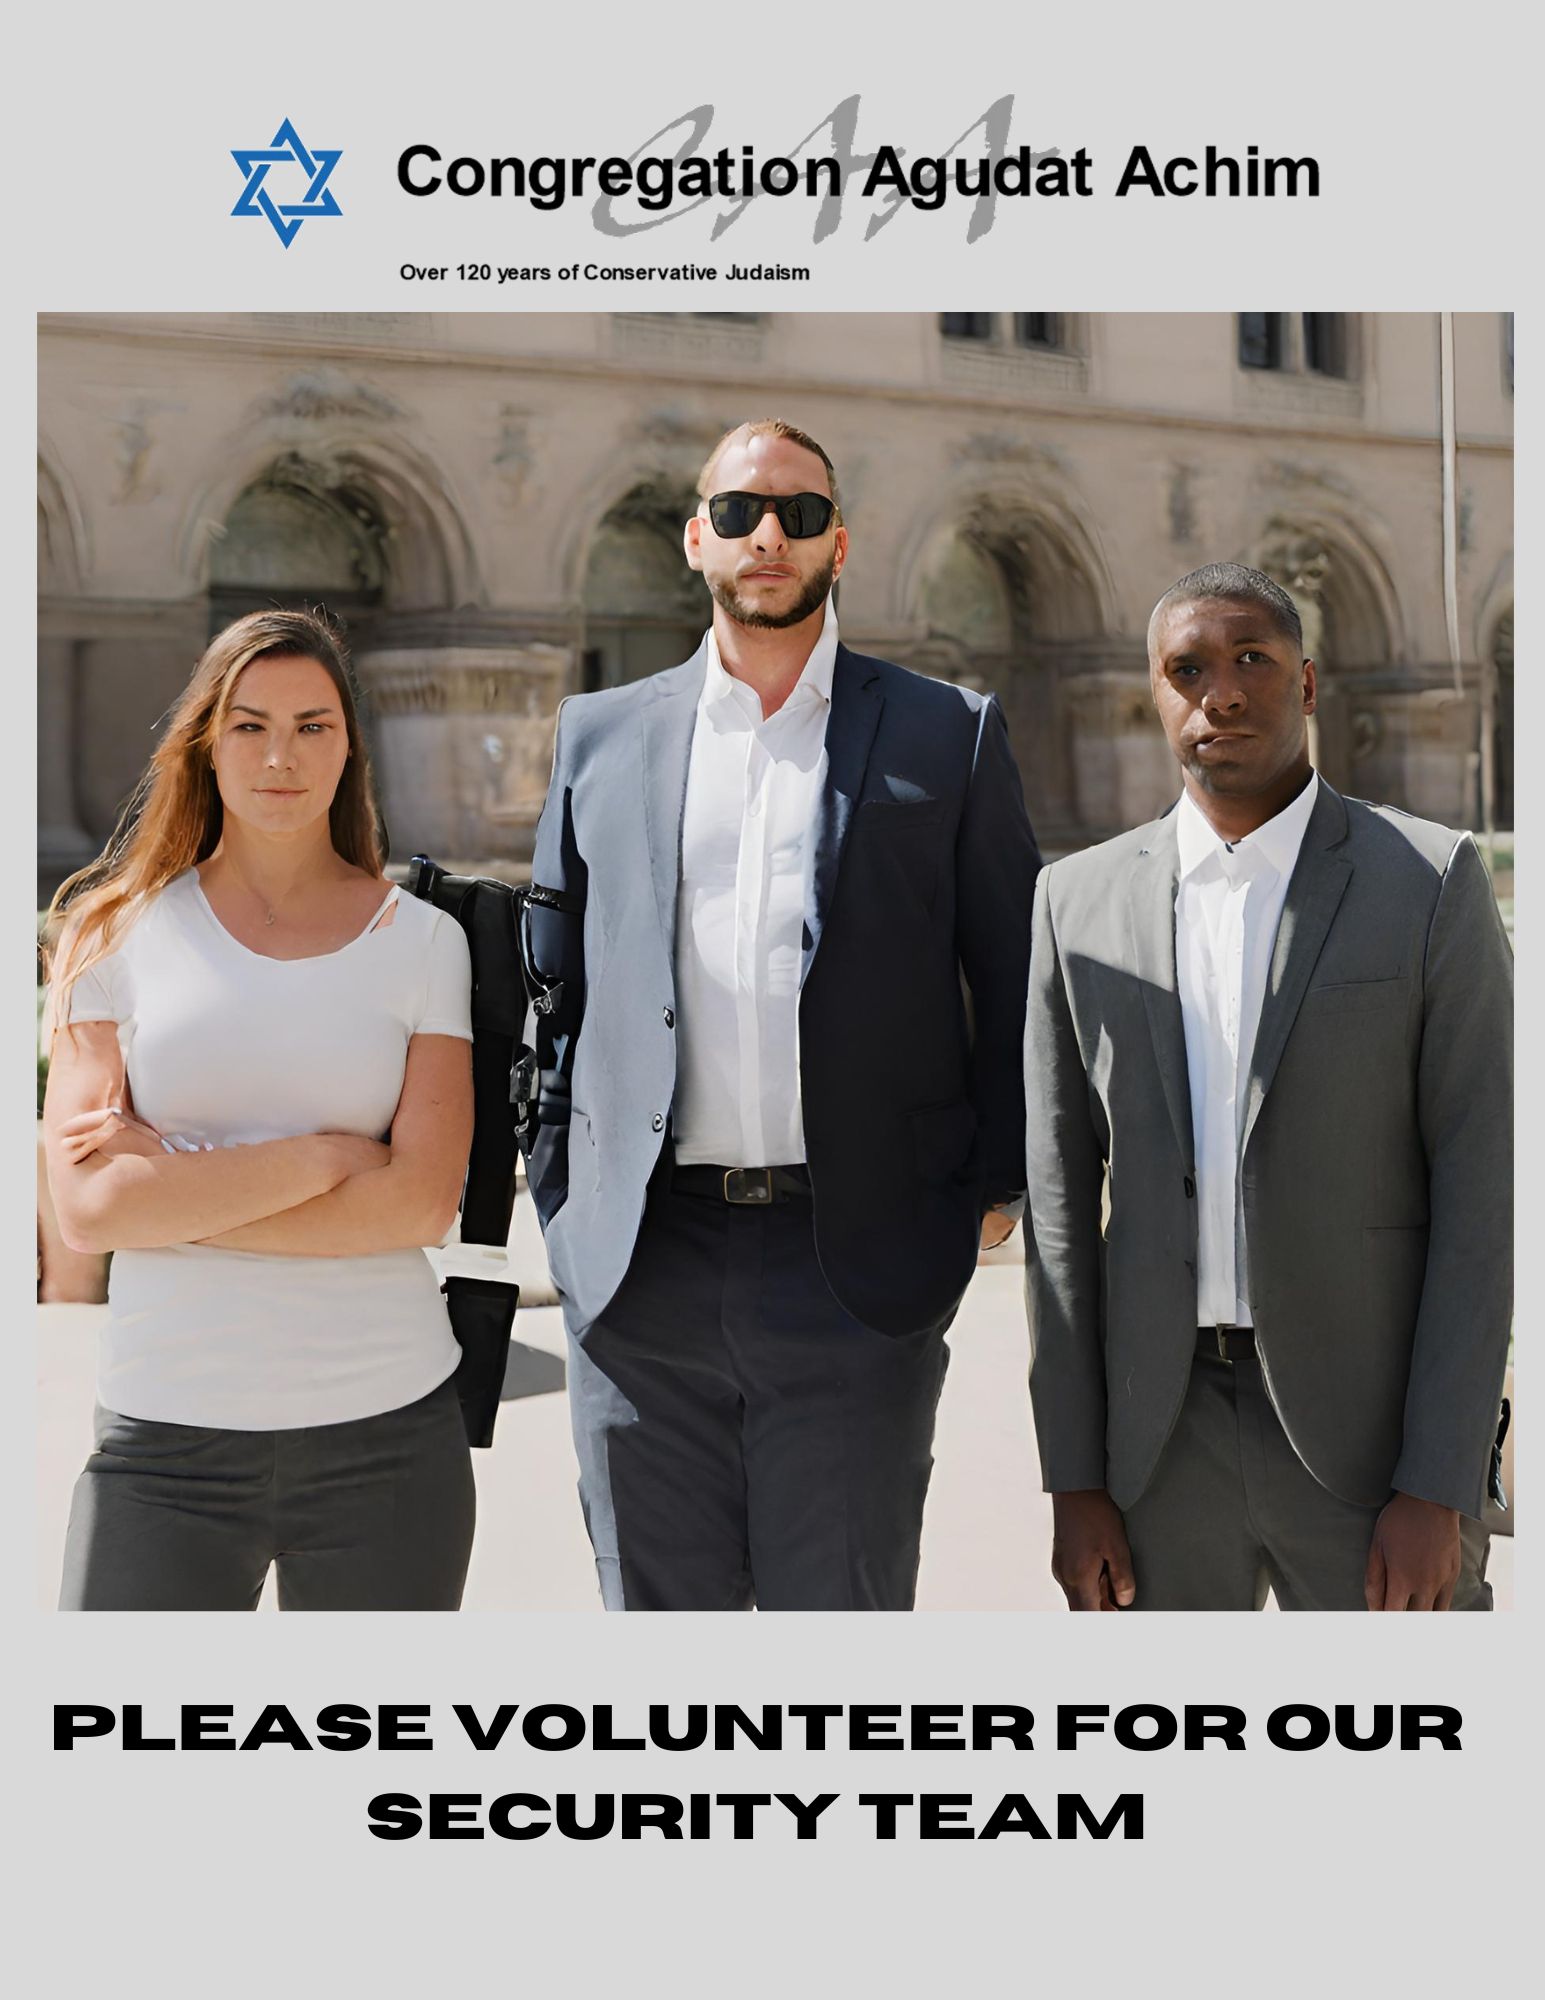 Volunteer For Our Security Team